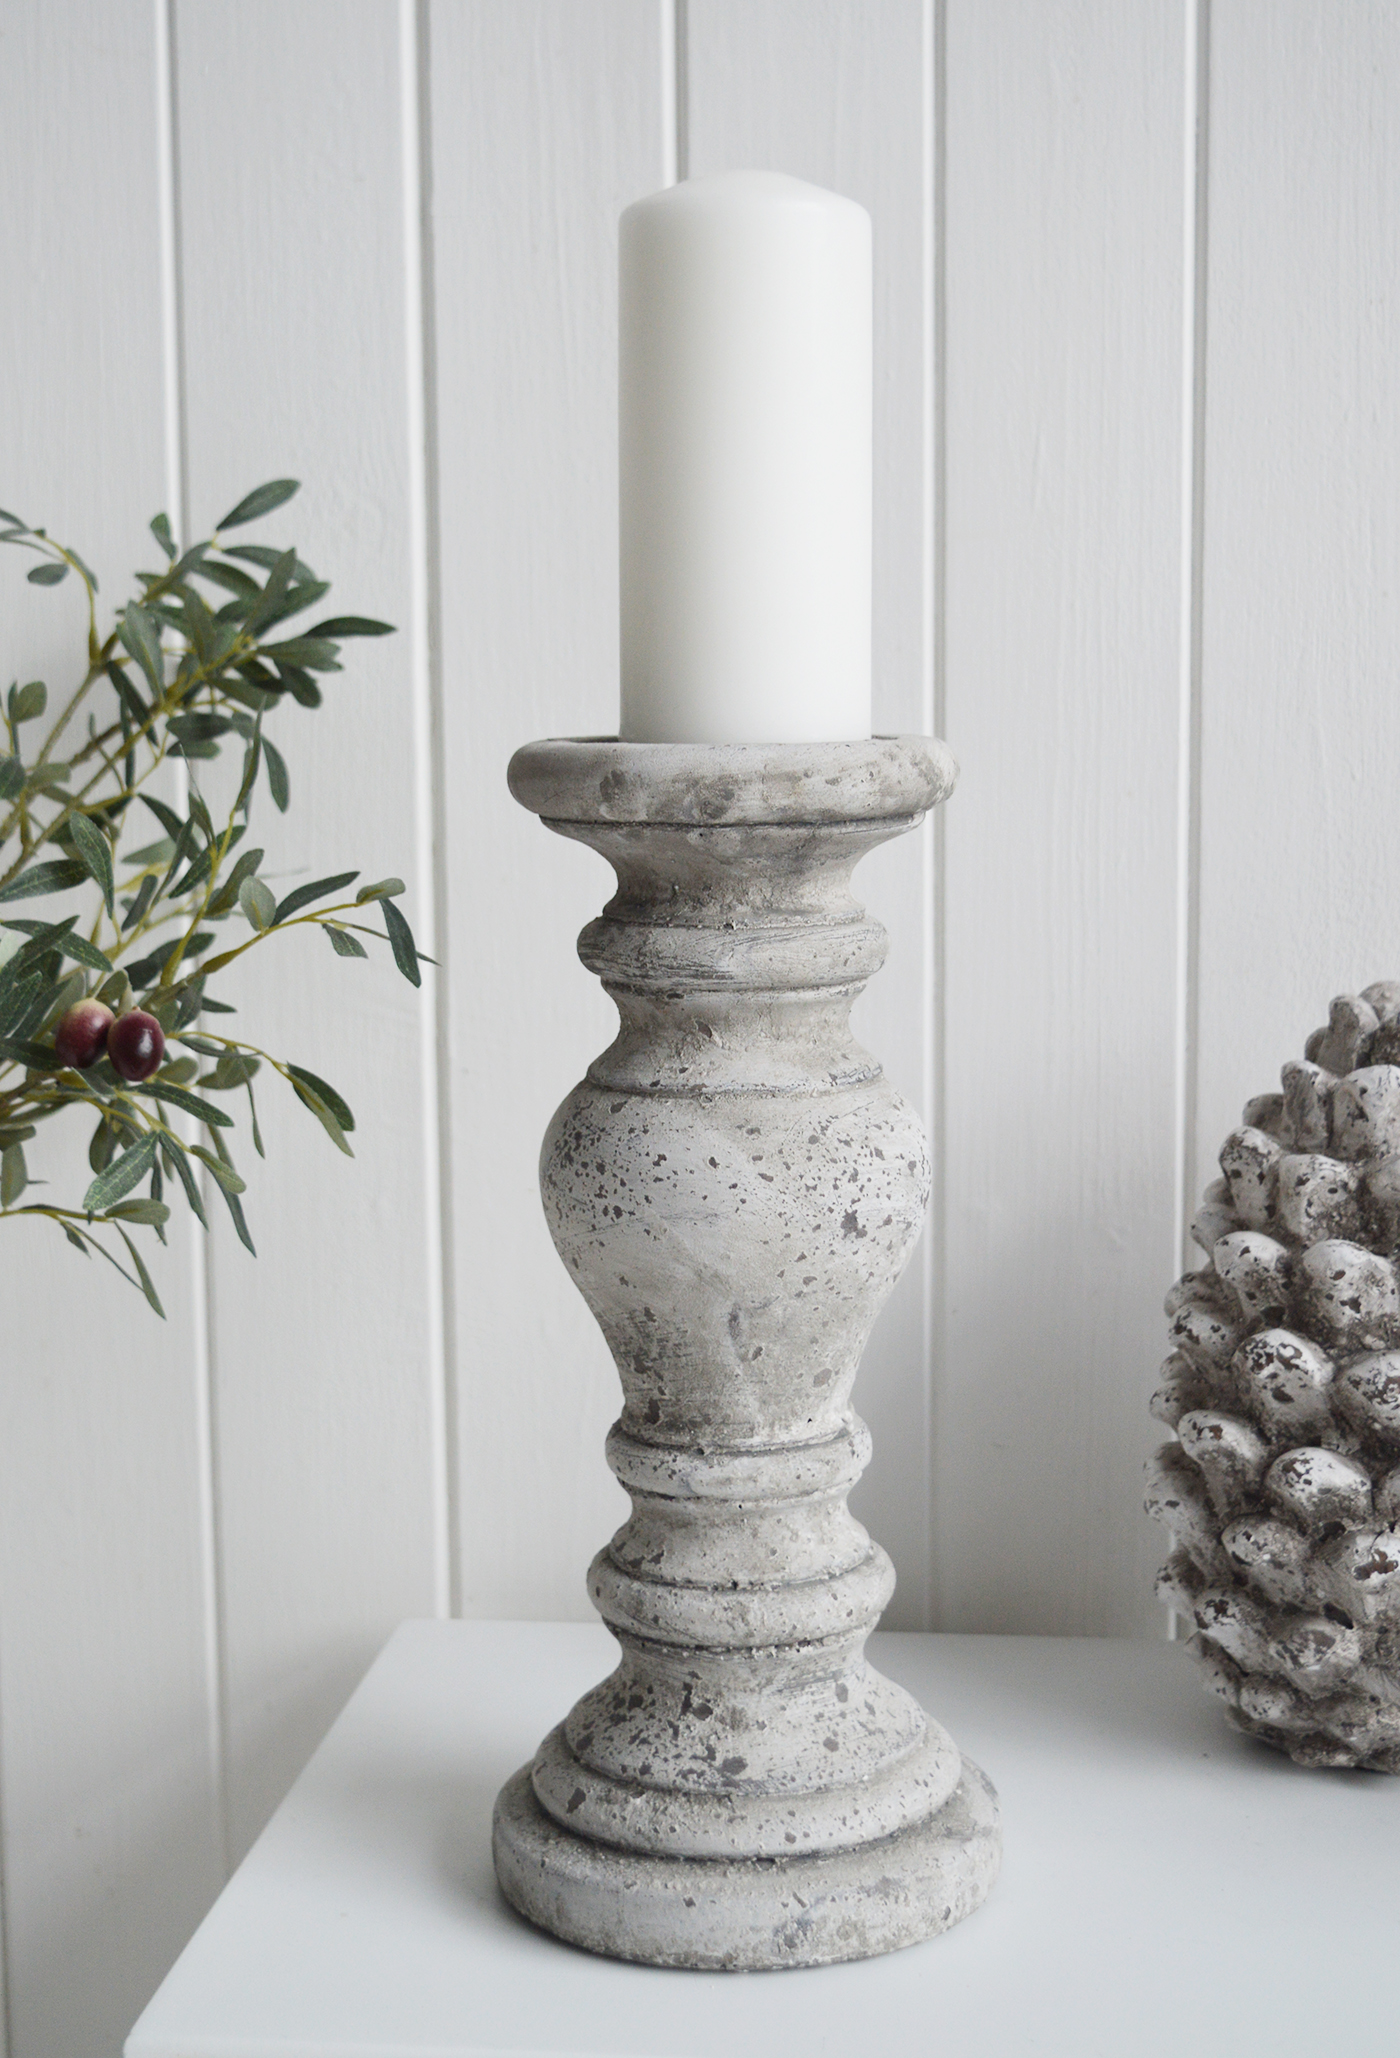 Aged Stone Candle Holder - New ENgland Style Accessories